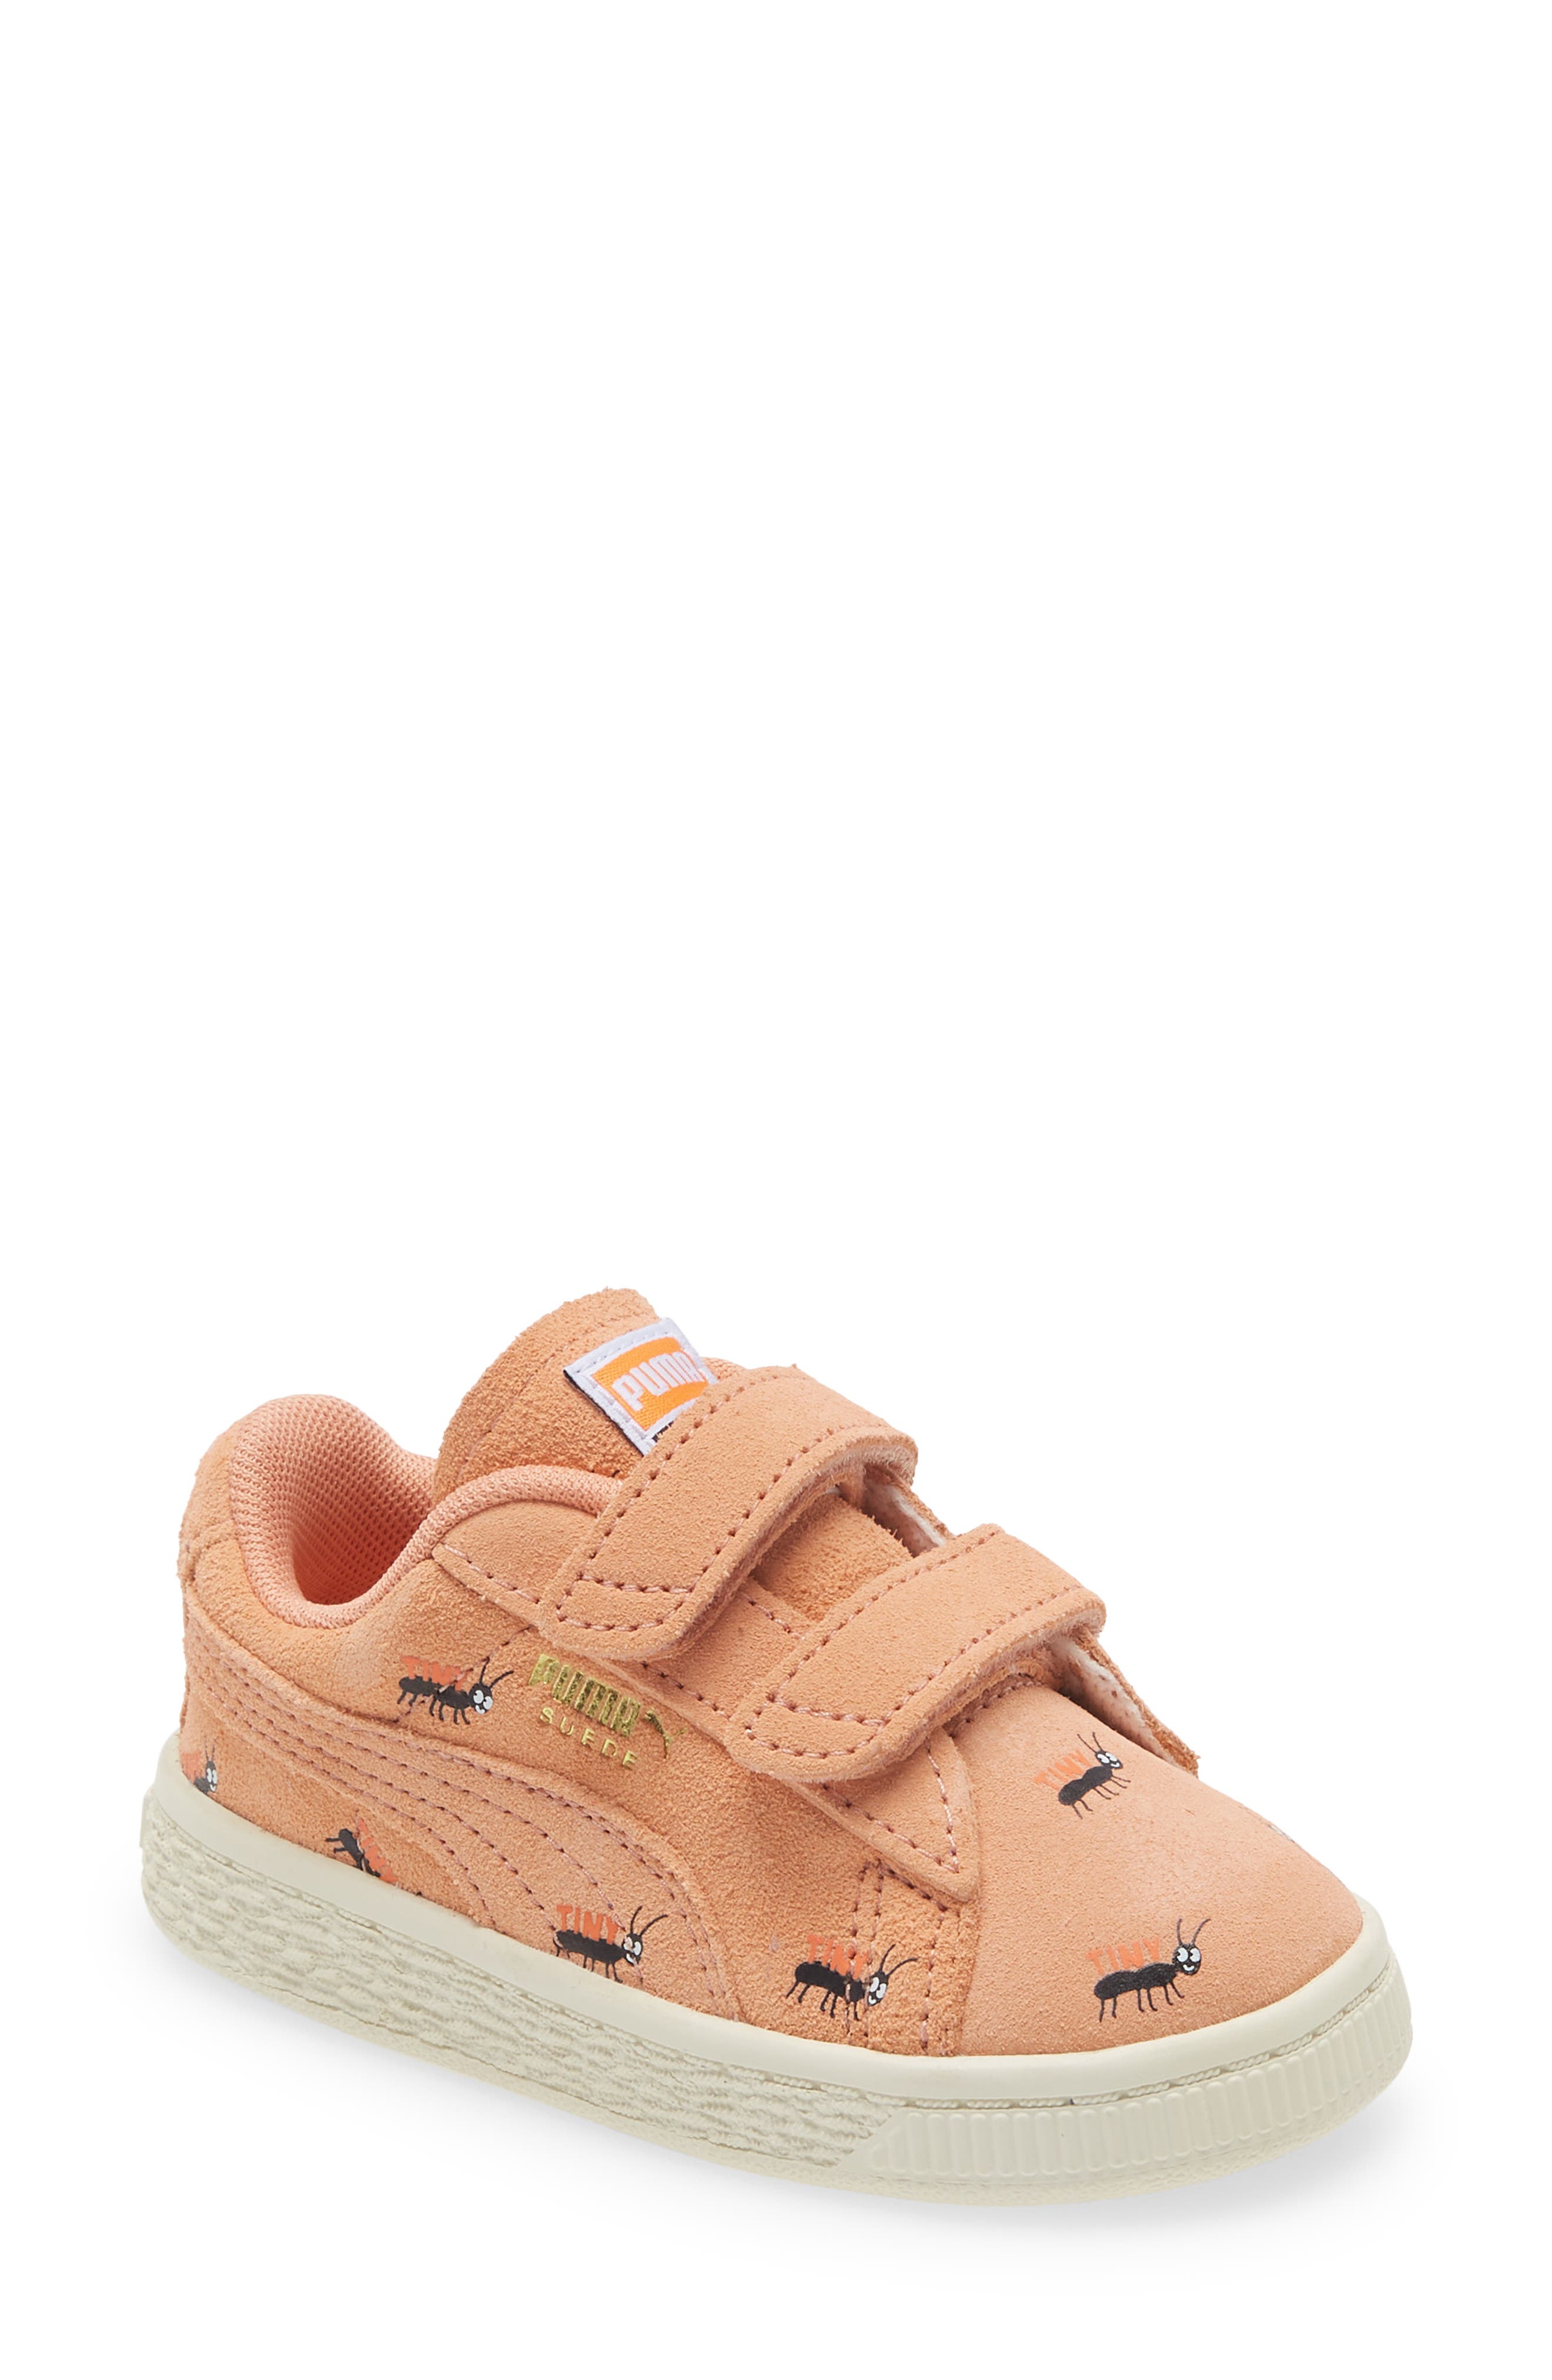 coral toddler shoes